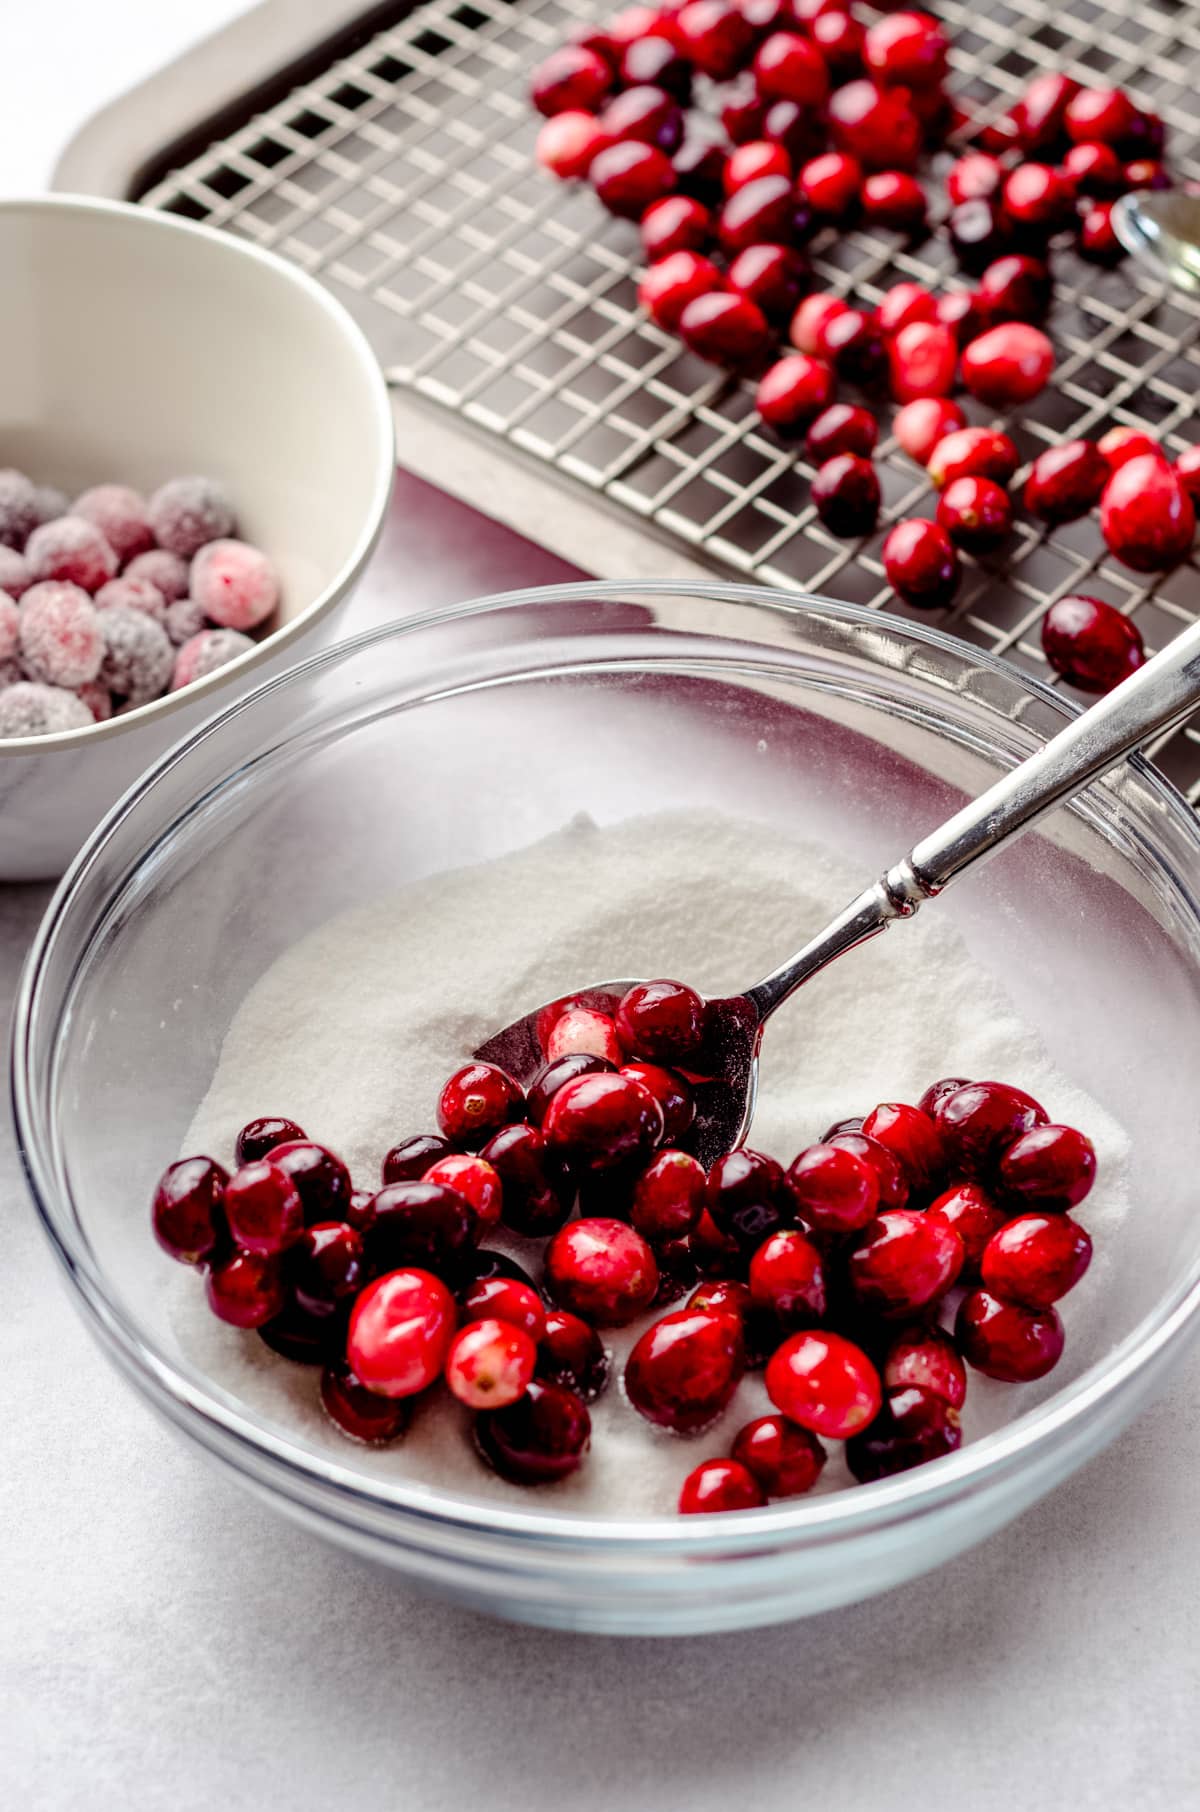 sugared cranberries in a bowl with a spoon to coat in sugar